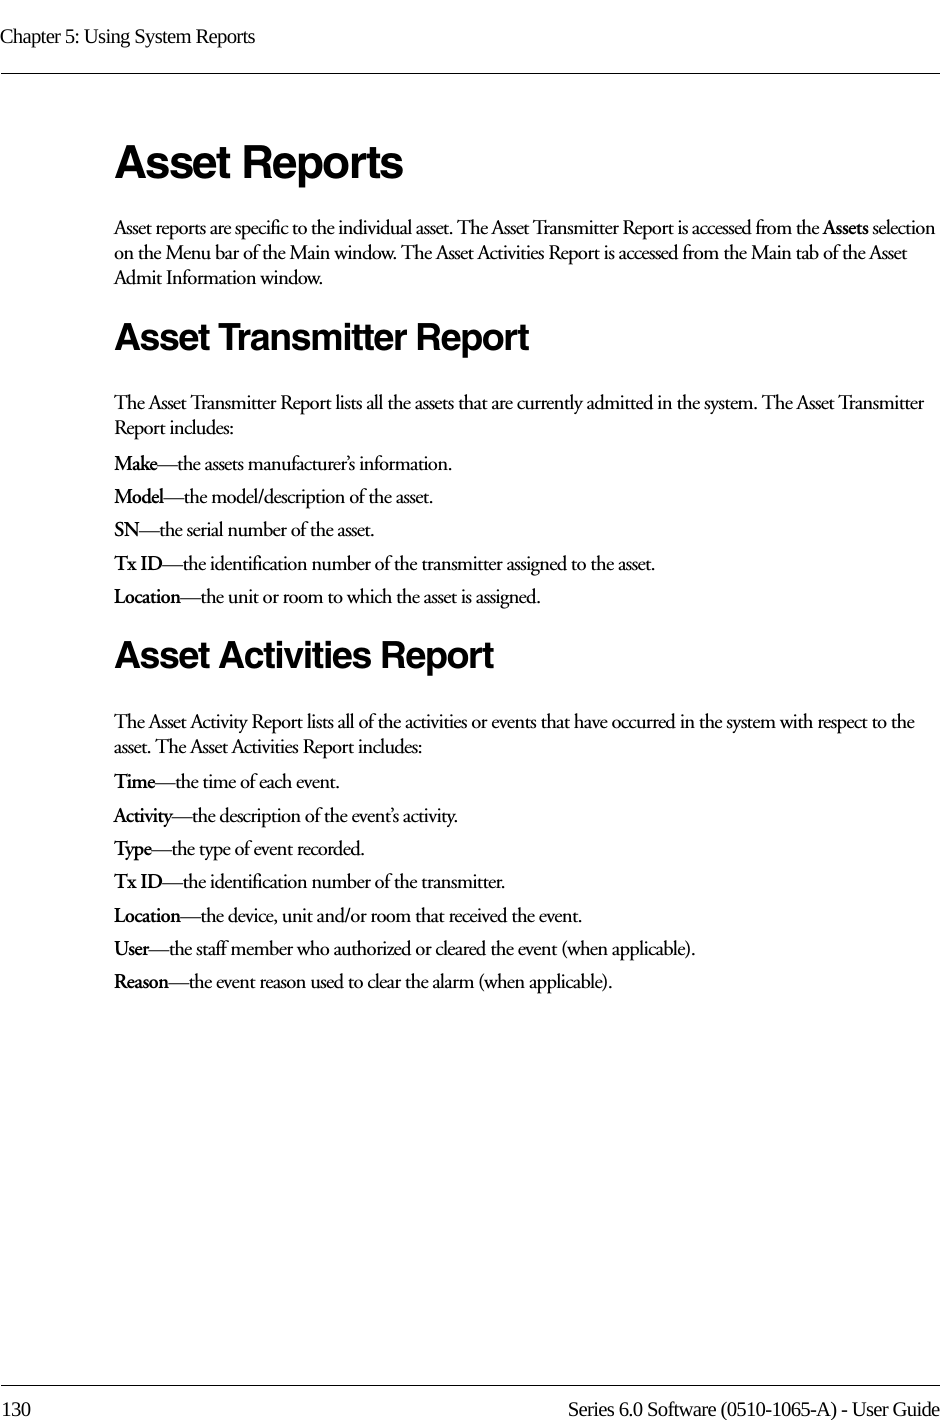 Chapter 5: Using System Reports130 Series 6.0 Software (0510-1065-A) - User GuideAsset ReportsAsset reports are specific to the individual asset. The Asset Transmitter Report is accessed from the Assets selection on the Menu bar of the Main window. The Asset Activities Report is accessed from the Main tab of the Asset Admit Information window.Asset Transmitter ReportThe Asset Transmitter Report lists all the assets that are currently admitted in the system. The Asset Transmitter Report includes:Make—the assets manufacturer’s information.Model—the model/description of the asset.SN—the serial number of the asset. Tx ID—the identification number of the transmitter assigned to the asset.Location—the unit or room to which the asset is assigned.Asset Activities ReportThe Asset Activity Report lists all of the activities or events that have occurred in the system with respect to the asset. The Asset Activities Report includes:Time—the time of each event.Activity—the description of the event’s activity.Type—the type of event recorded.Tx ID—the identification number of the transmitter.Location—the device, unit and/or room that received the event.User—the staff member who authorized or cleared the event (when applicable).Reason—the event reason used to clear the alarm (when applicable).